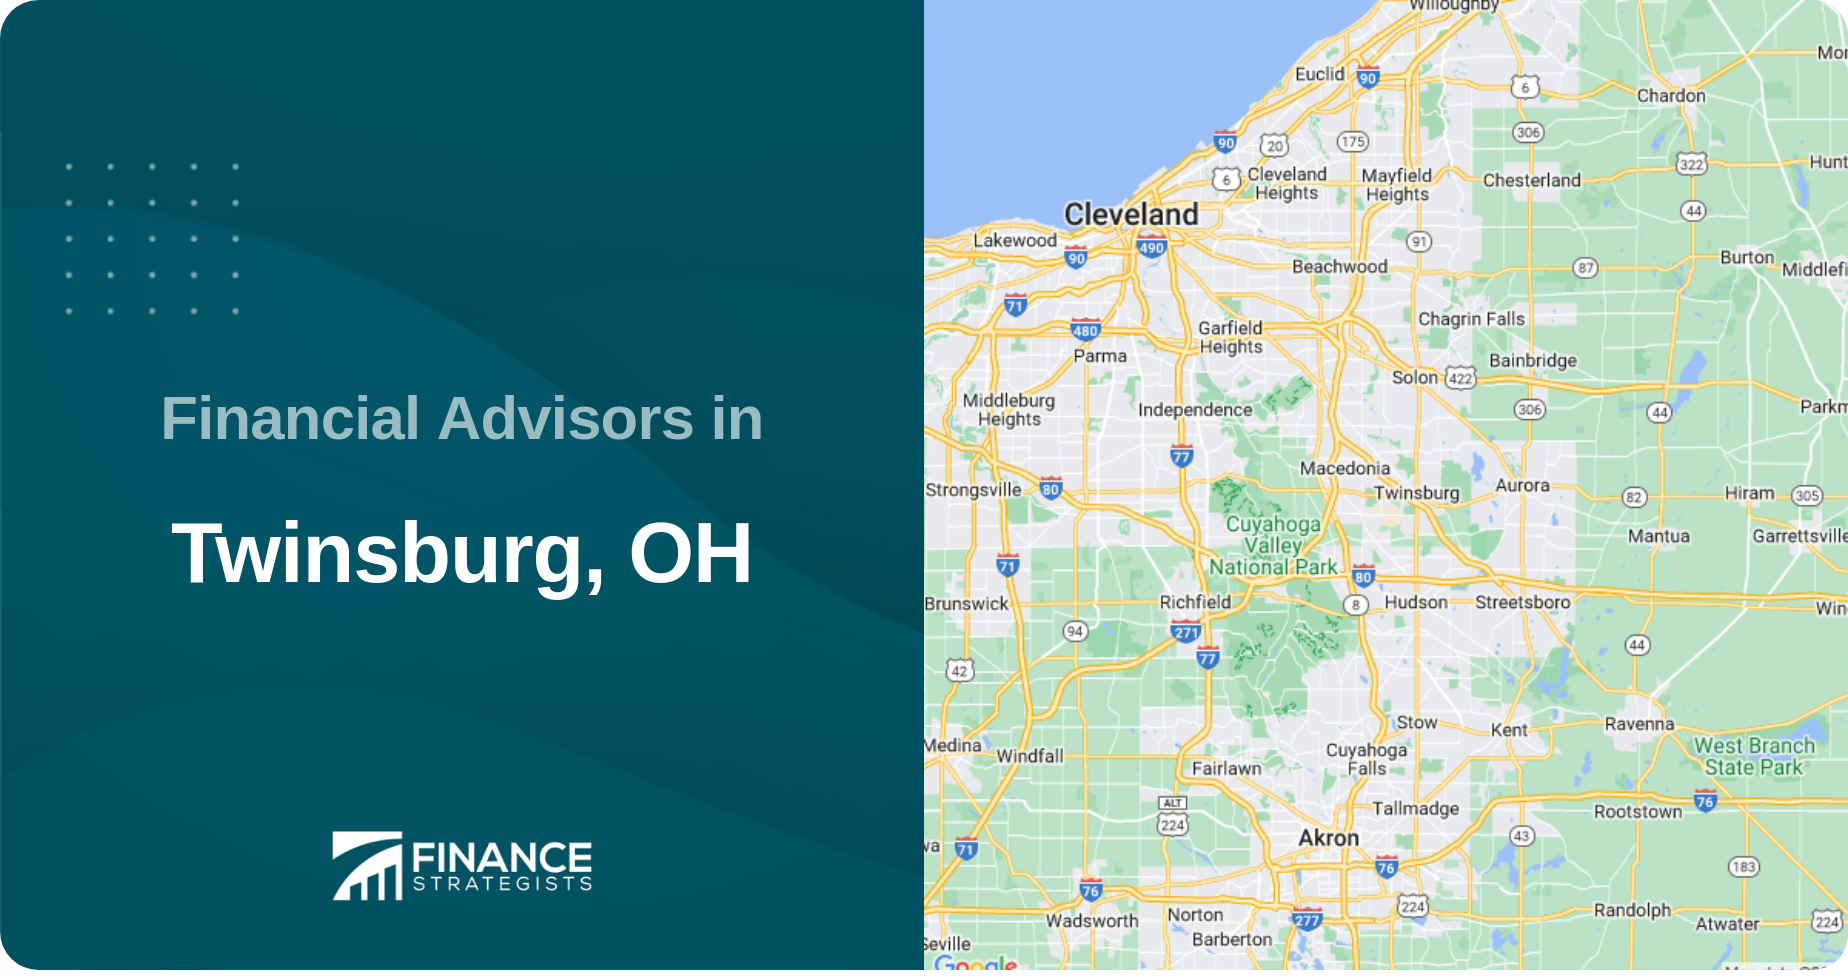 Financial Advisors in Twinsburg, OH